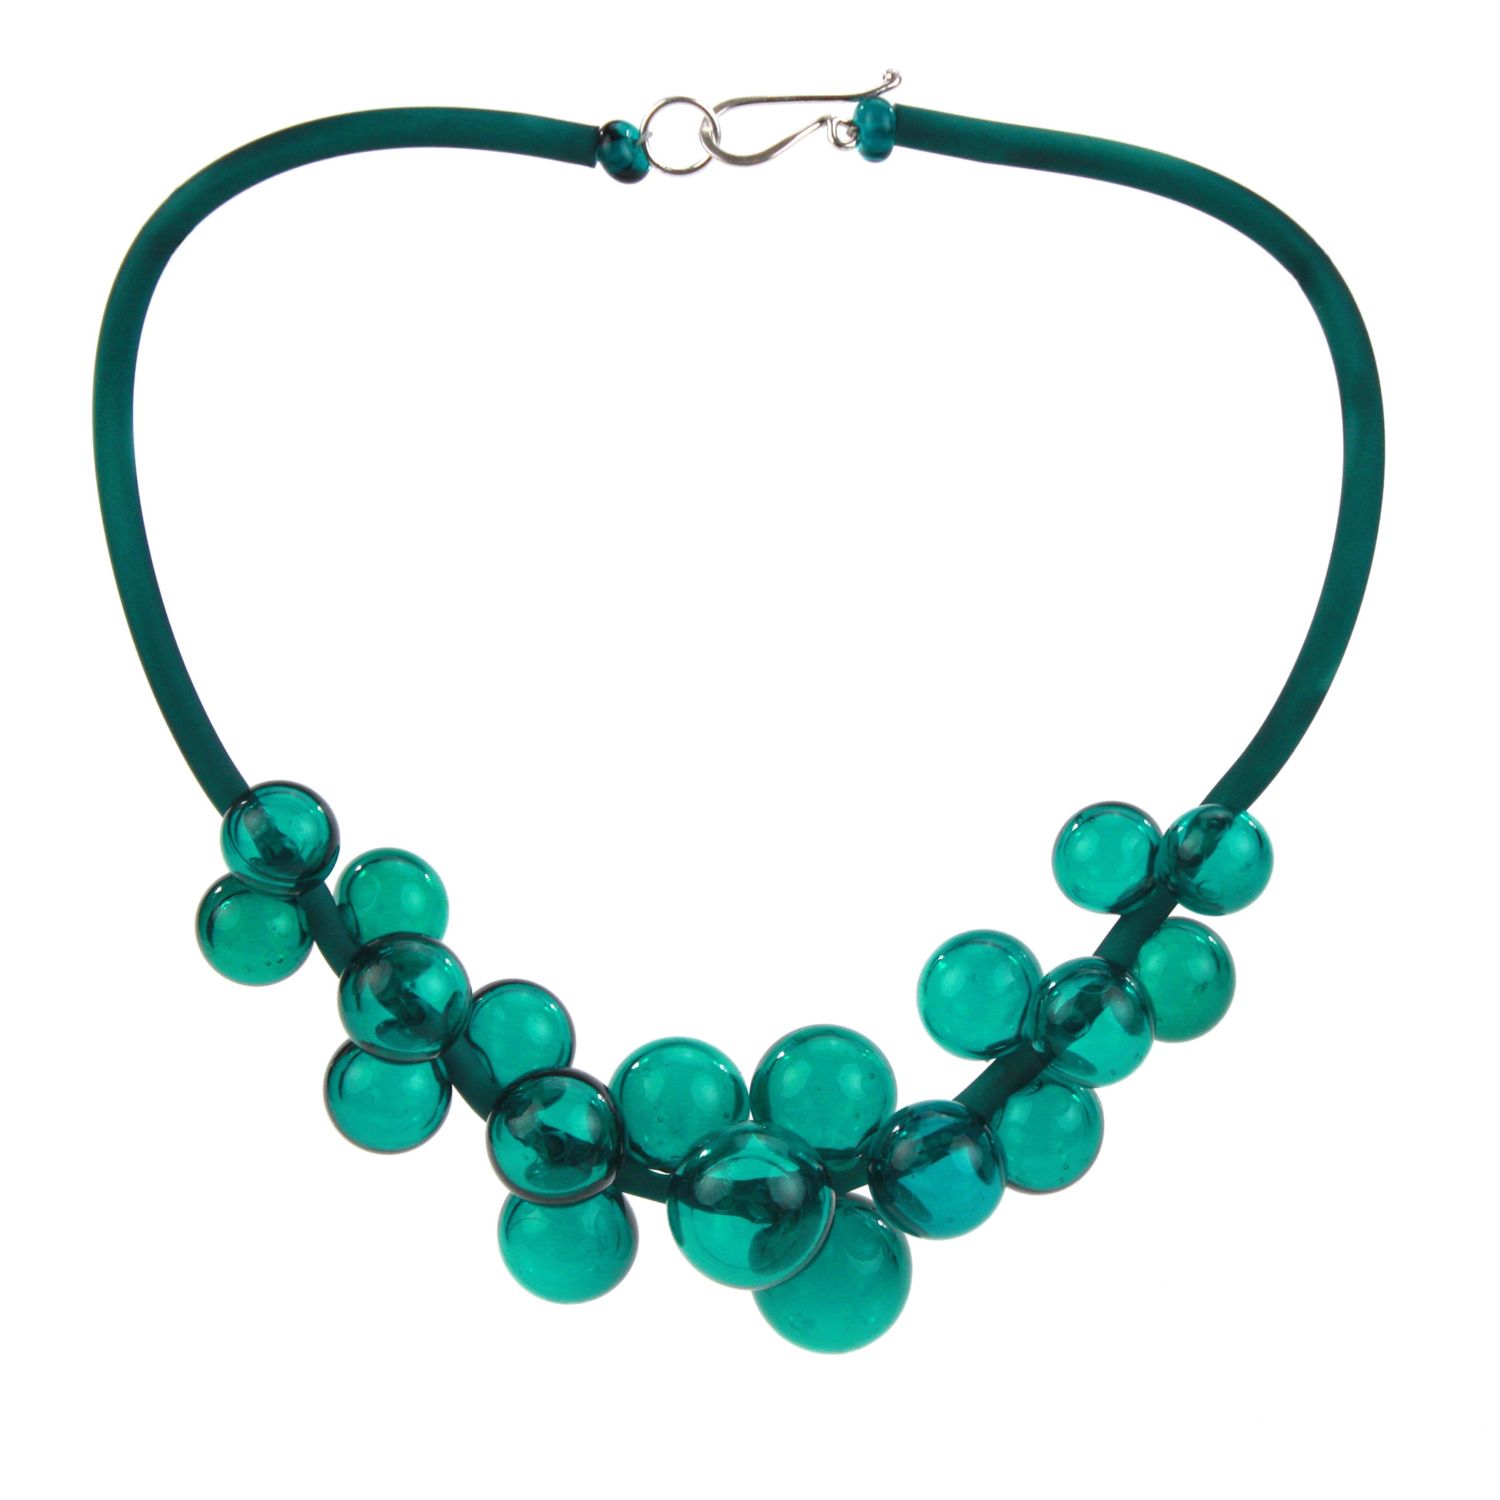 Alicia Niles: Chroma Bola Necklace – Teal Product Image 3 of 3